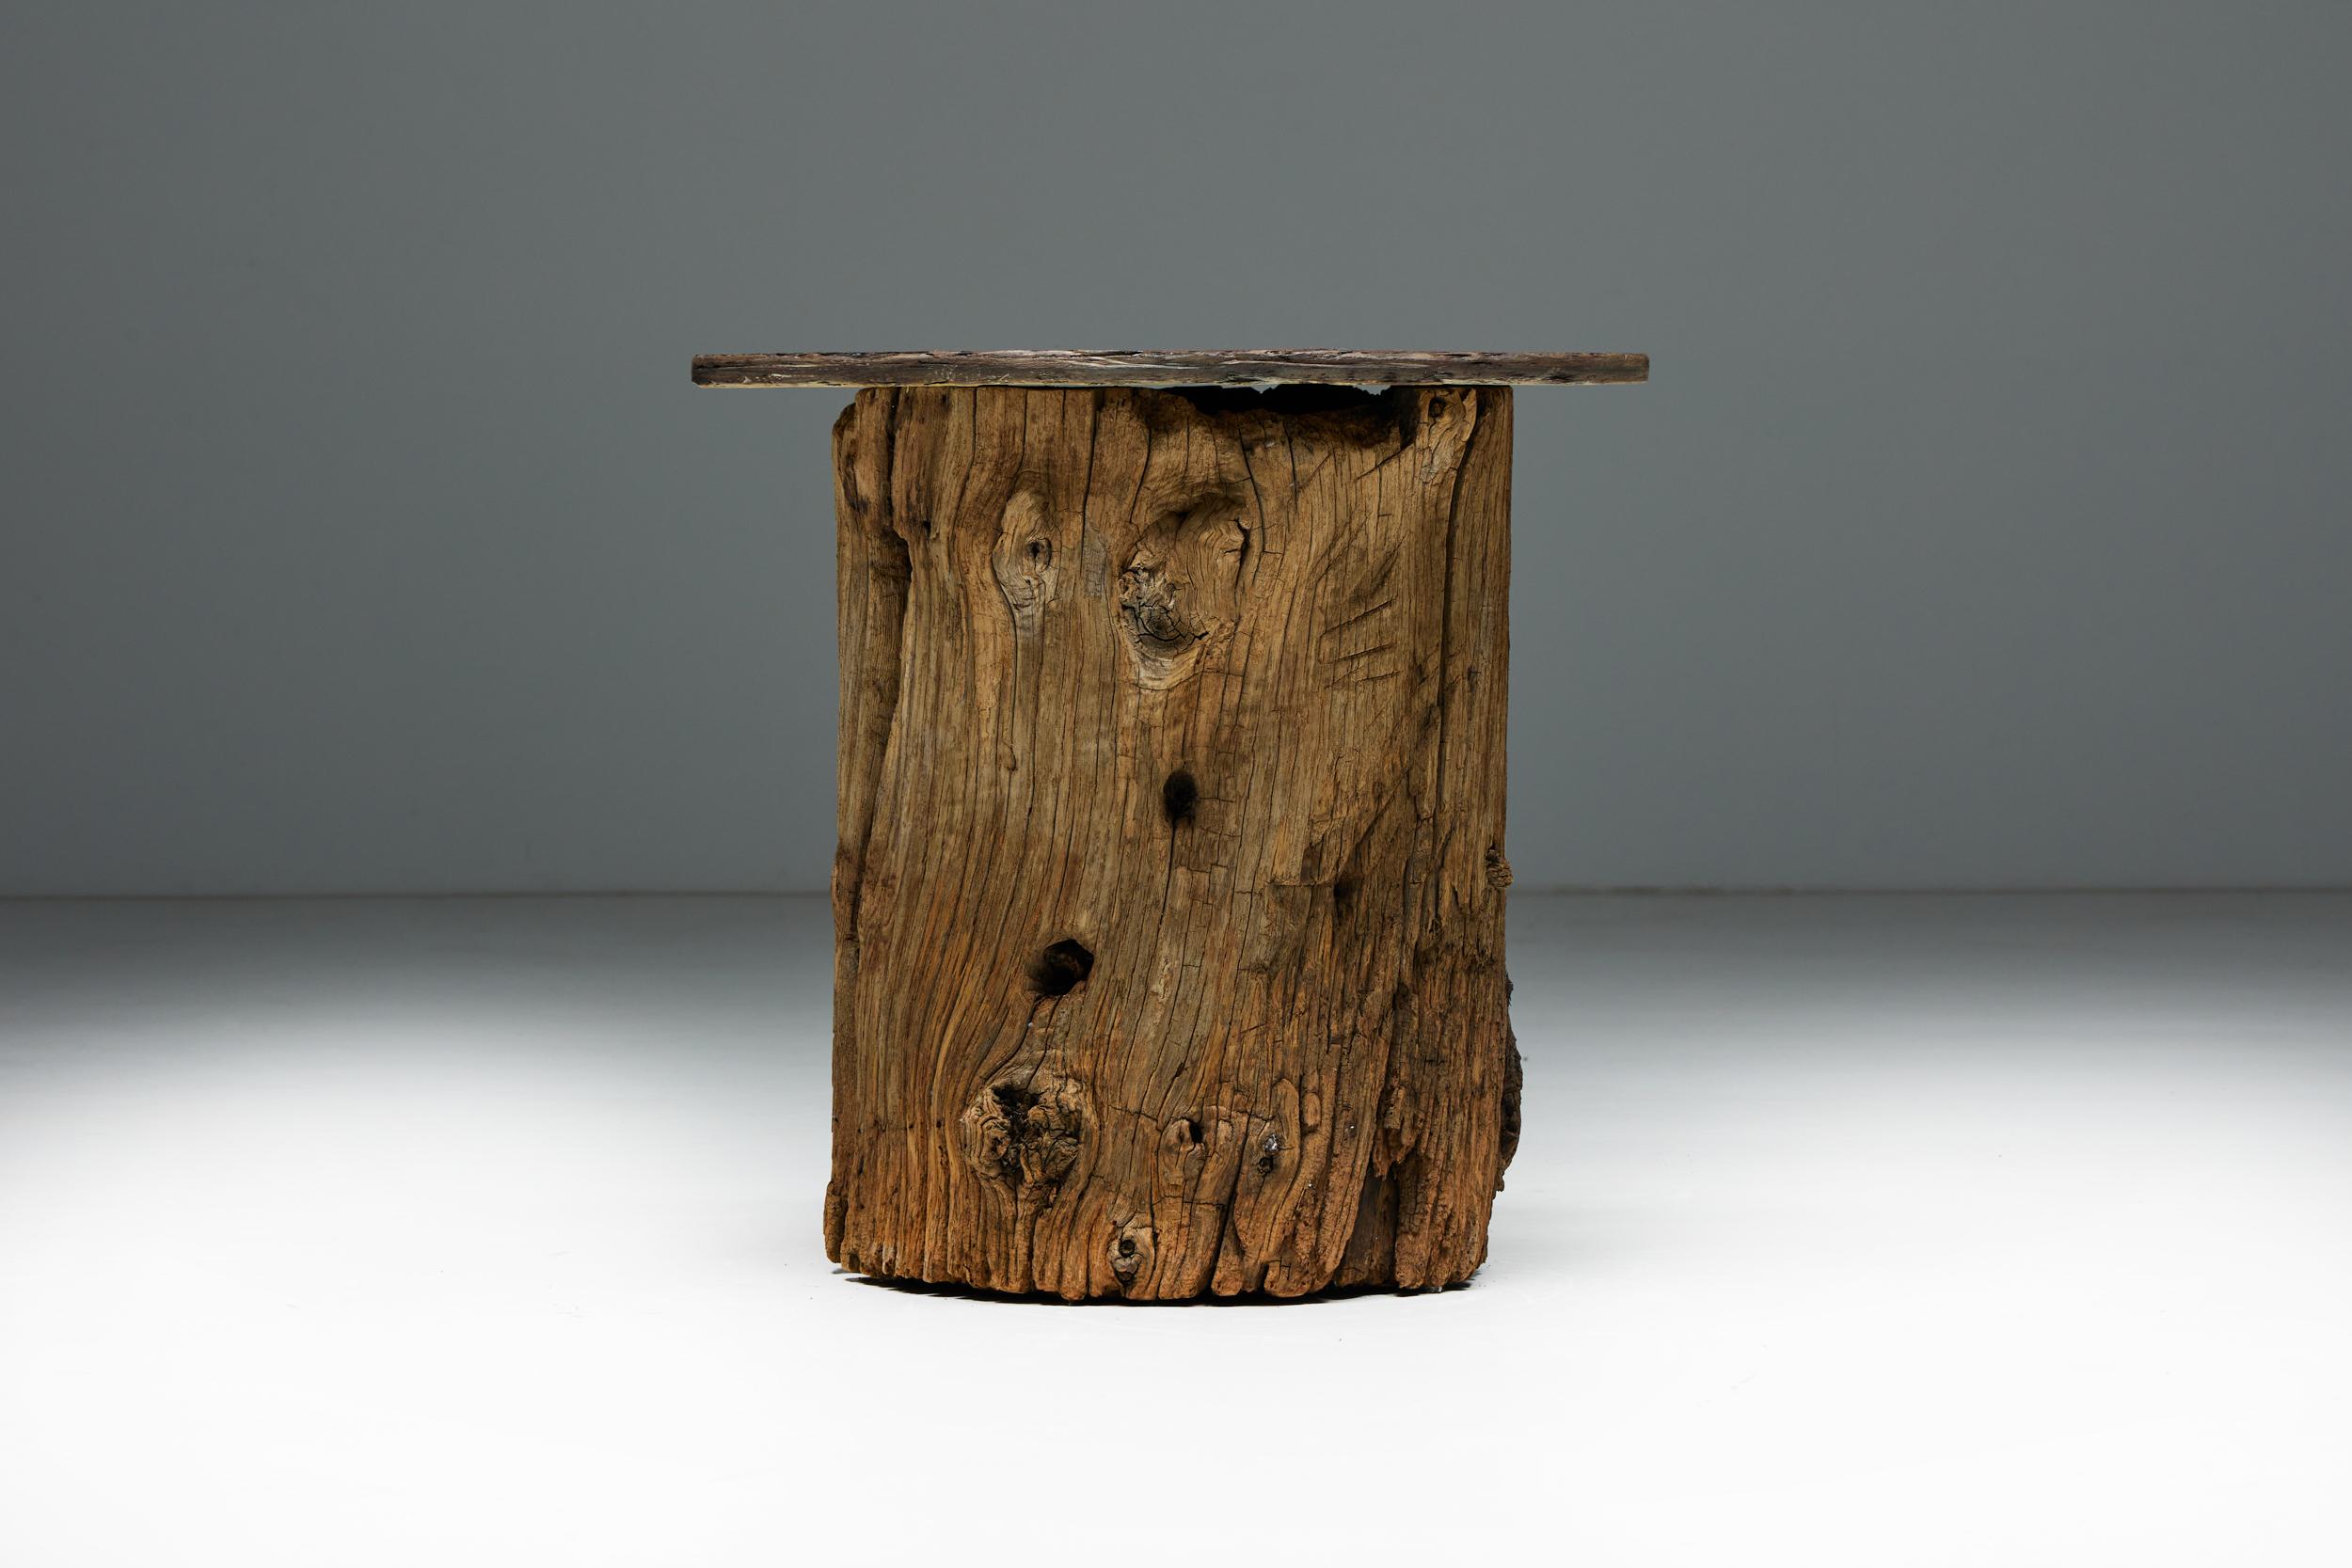 Beautiful side table, handcrafted from a solid tree trunk with a beautiful slate top. This side table is a harmonious fusion of natural beauty and functional design. We have two matching tables available in other offerings, each a masterpiece with